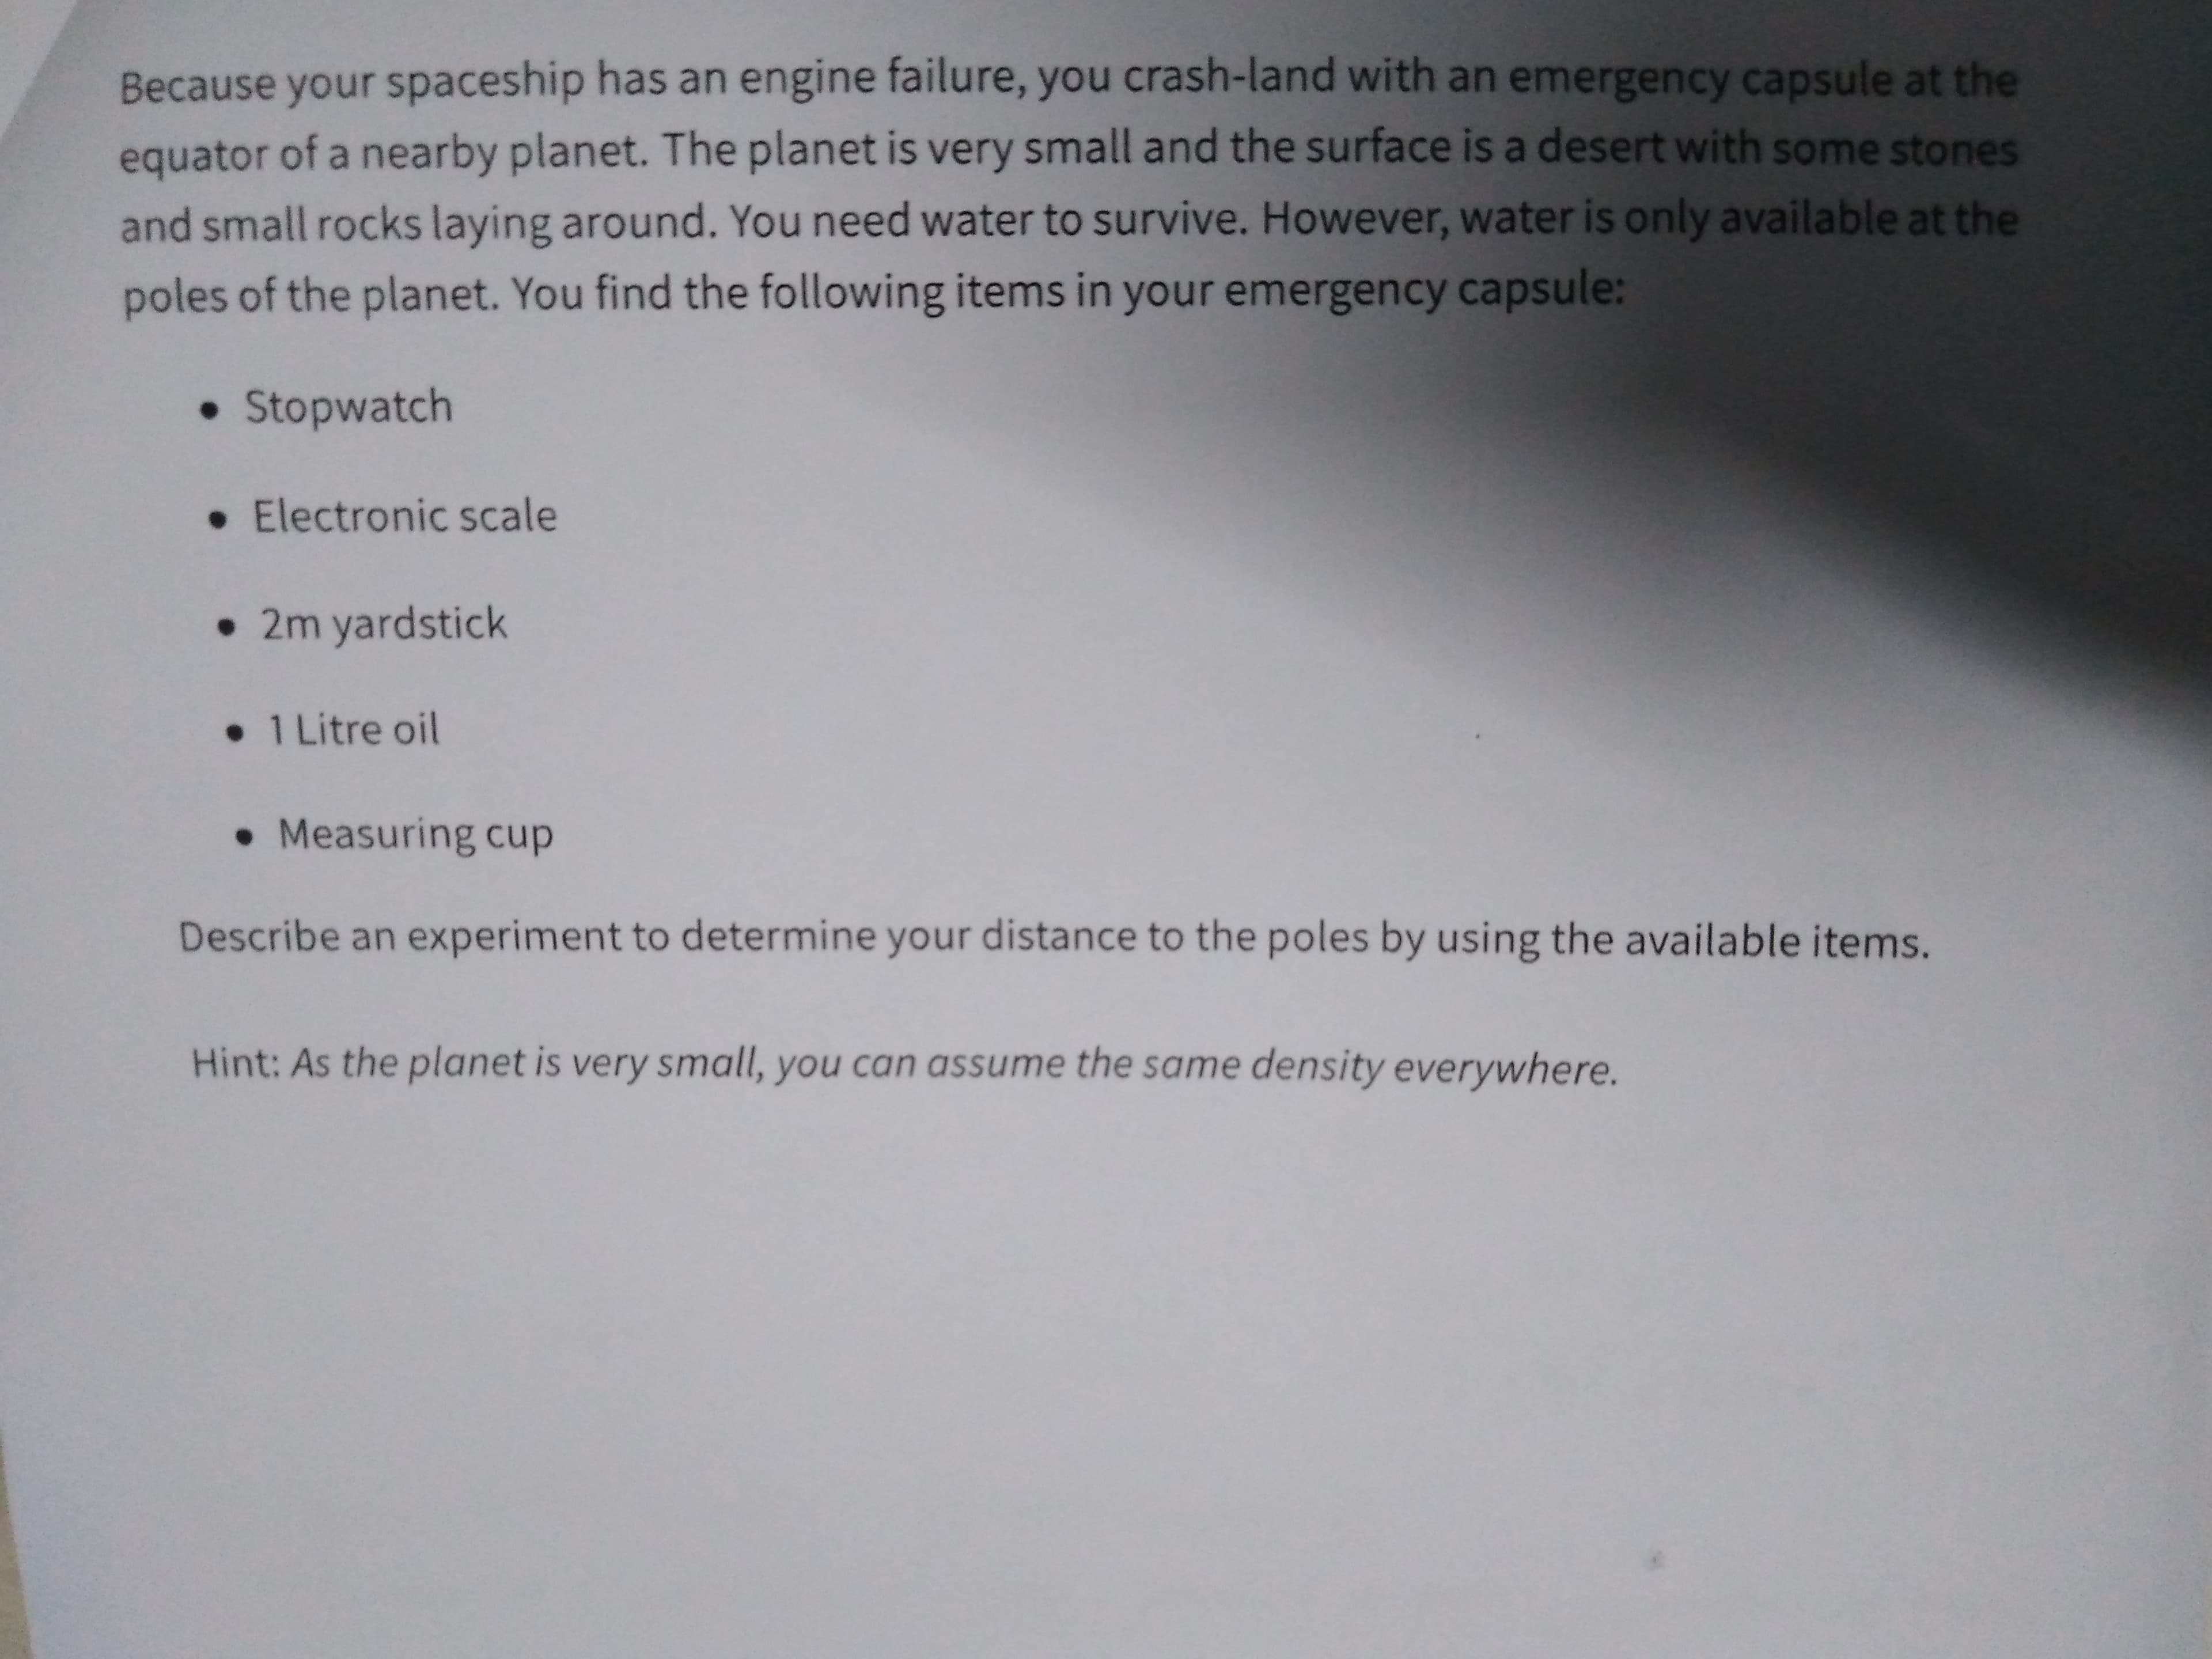 Because your spaceship has an engine failure, you crash-land with an emergency capsule at the
equator of a nearby planet. The planet is very small and the surface is a desert with some stones
and small rocks laying around. You need water to survive. However, water is only available at the
poles of the planet. You find the following items in your emergency capsule:
